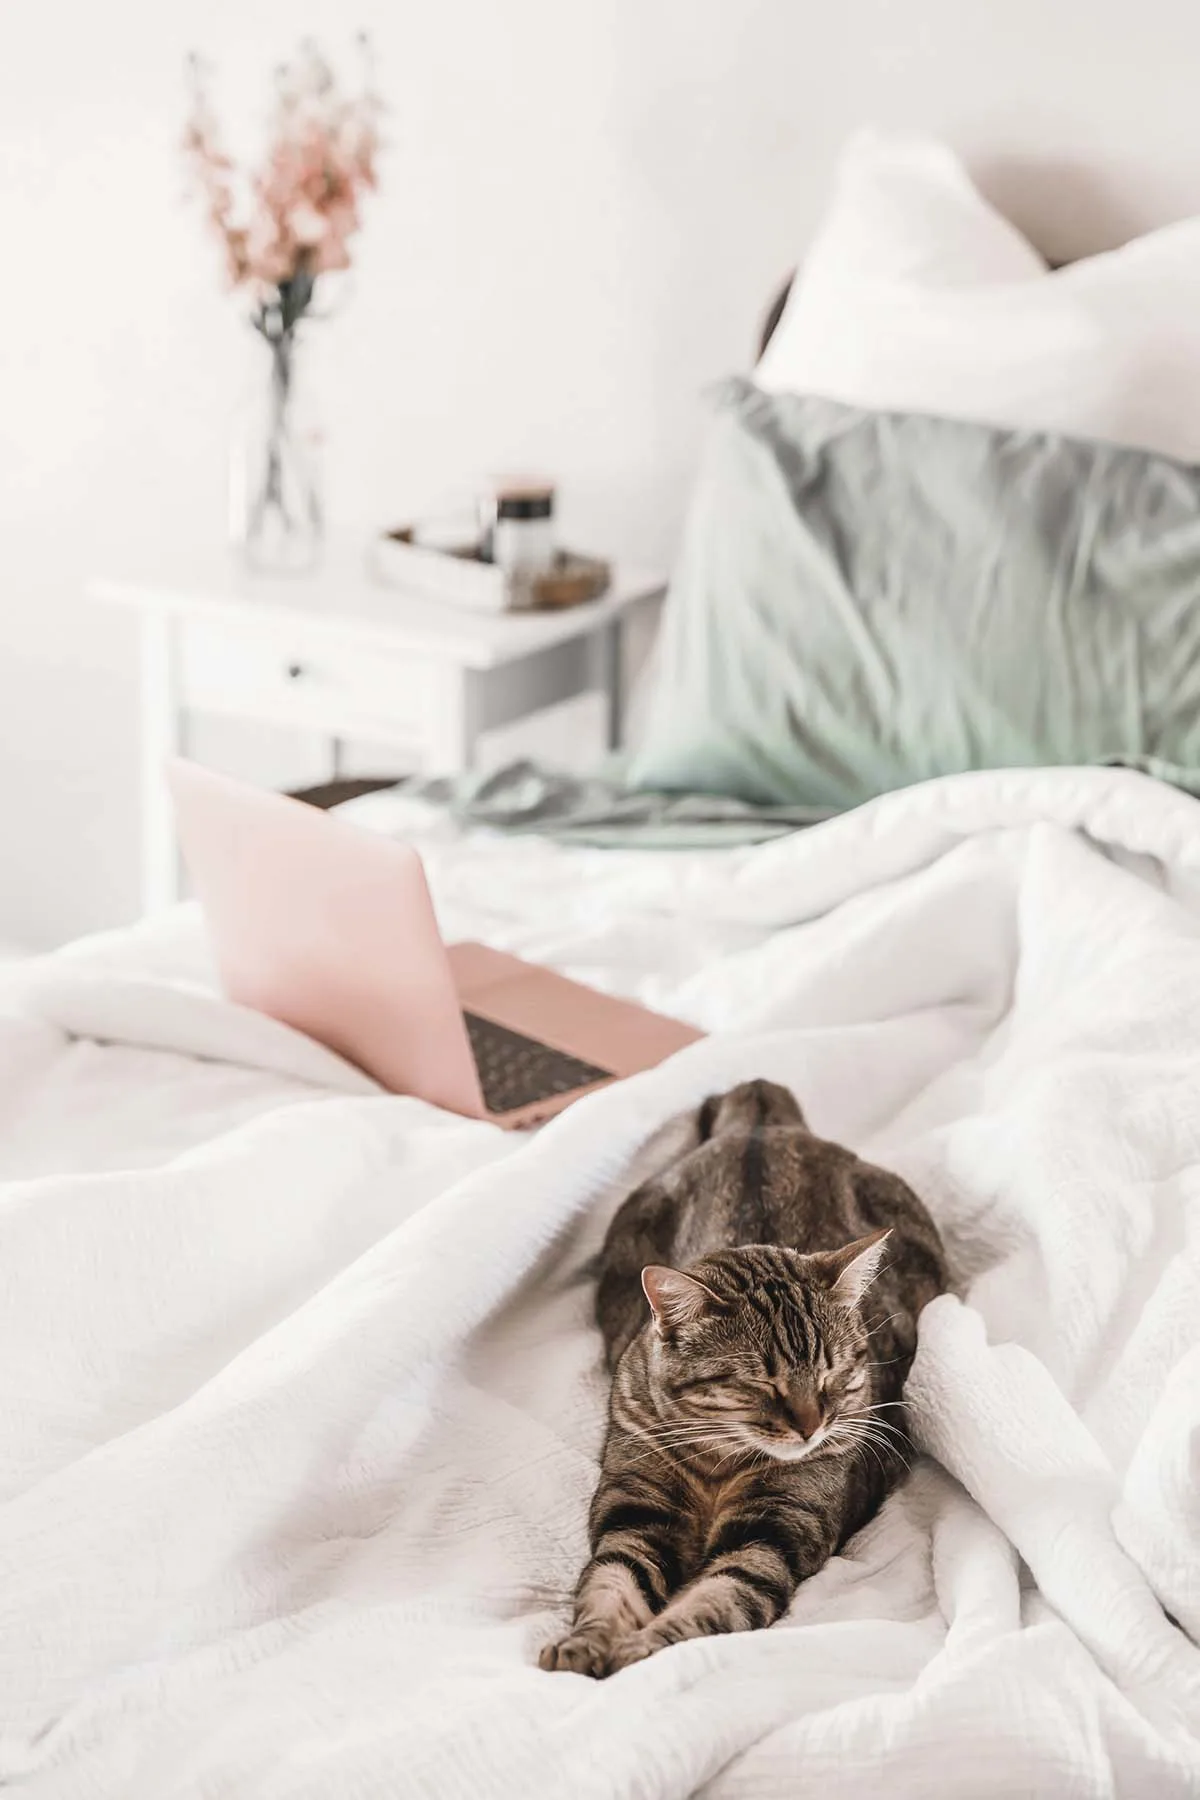 Your bedroom is supposed to be your sanctuary, but can quickly become a room of chaos. Here are 5 things to keep out of the bedroom to keep it calm and cozy.